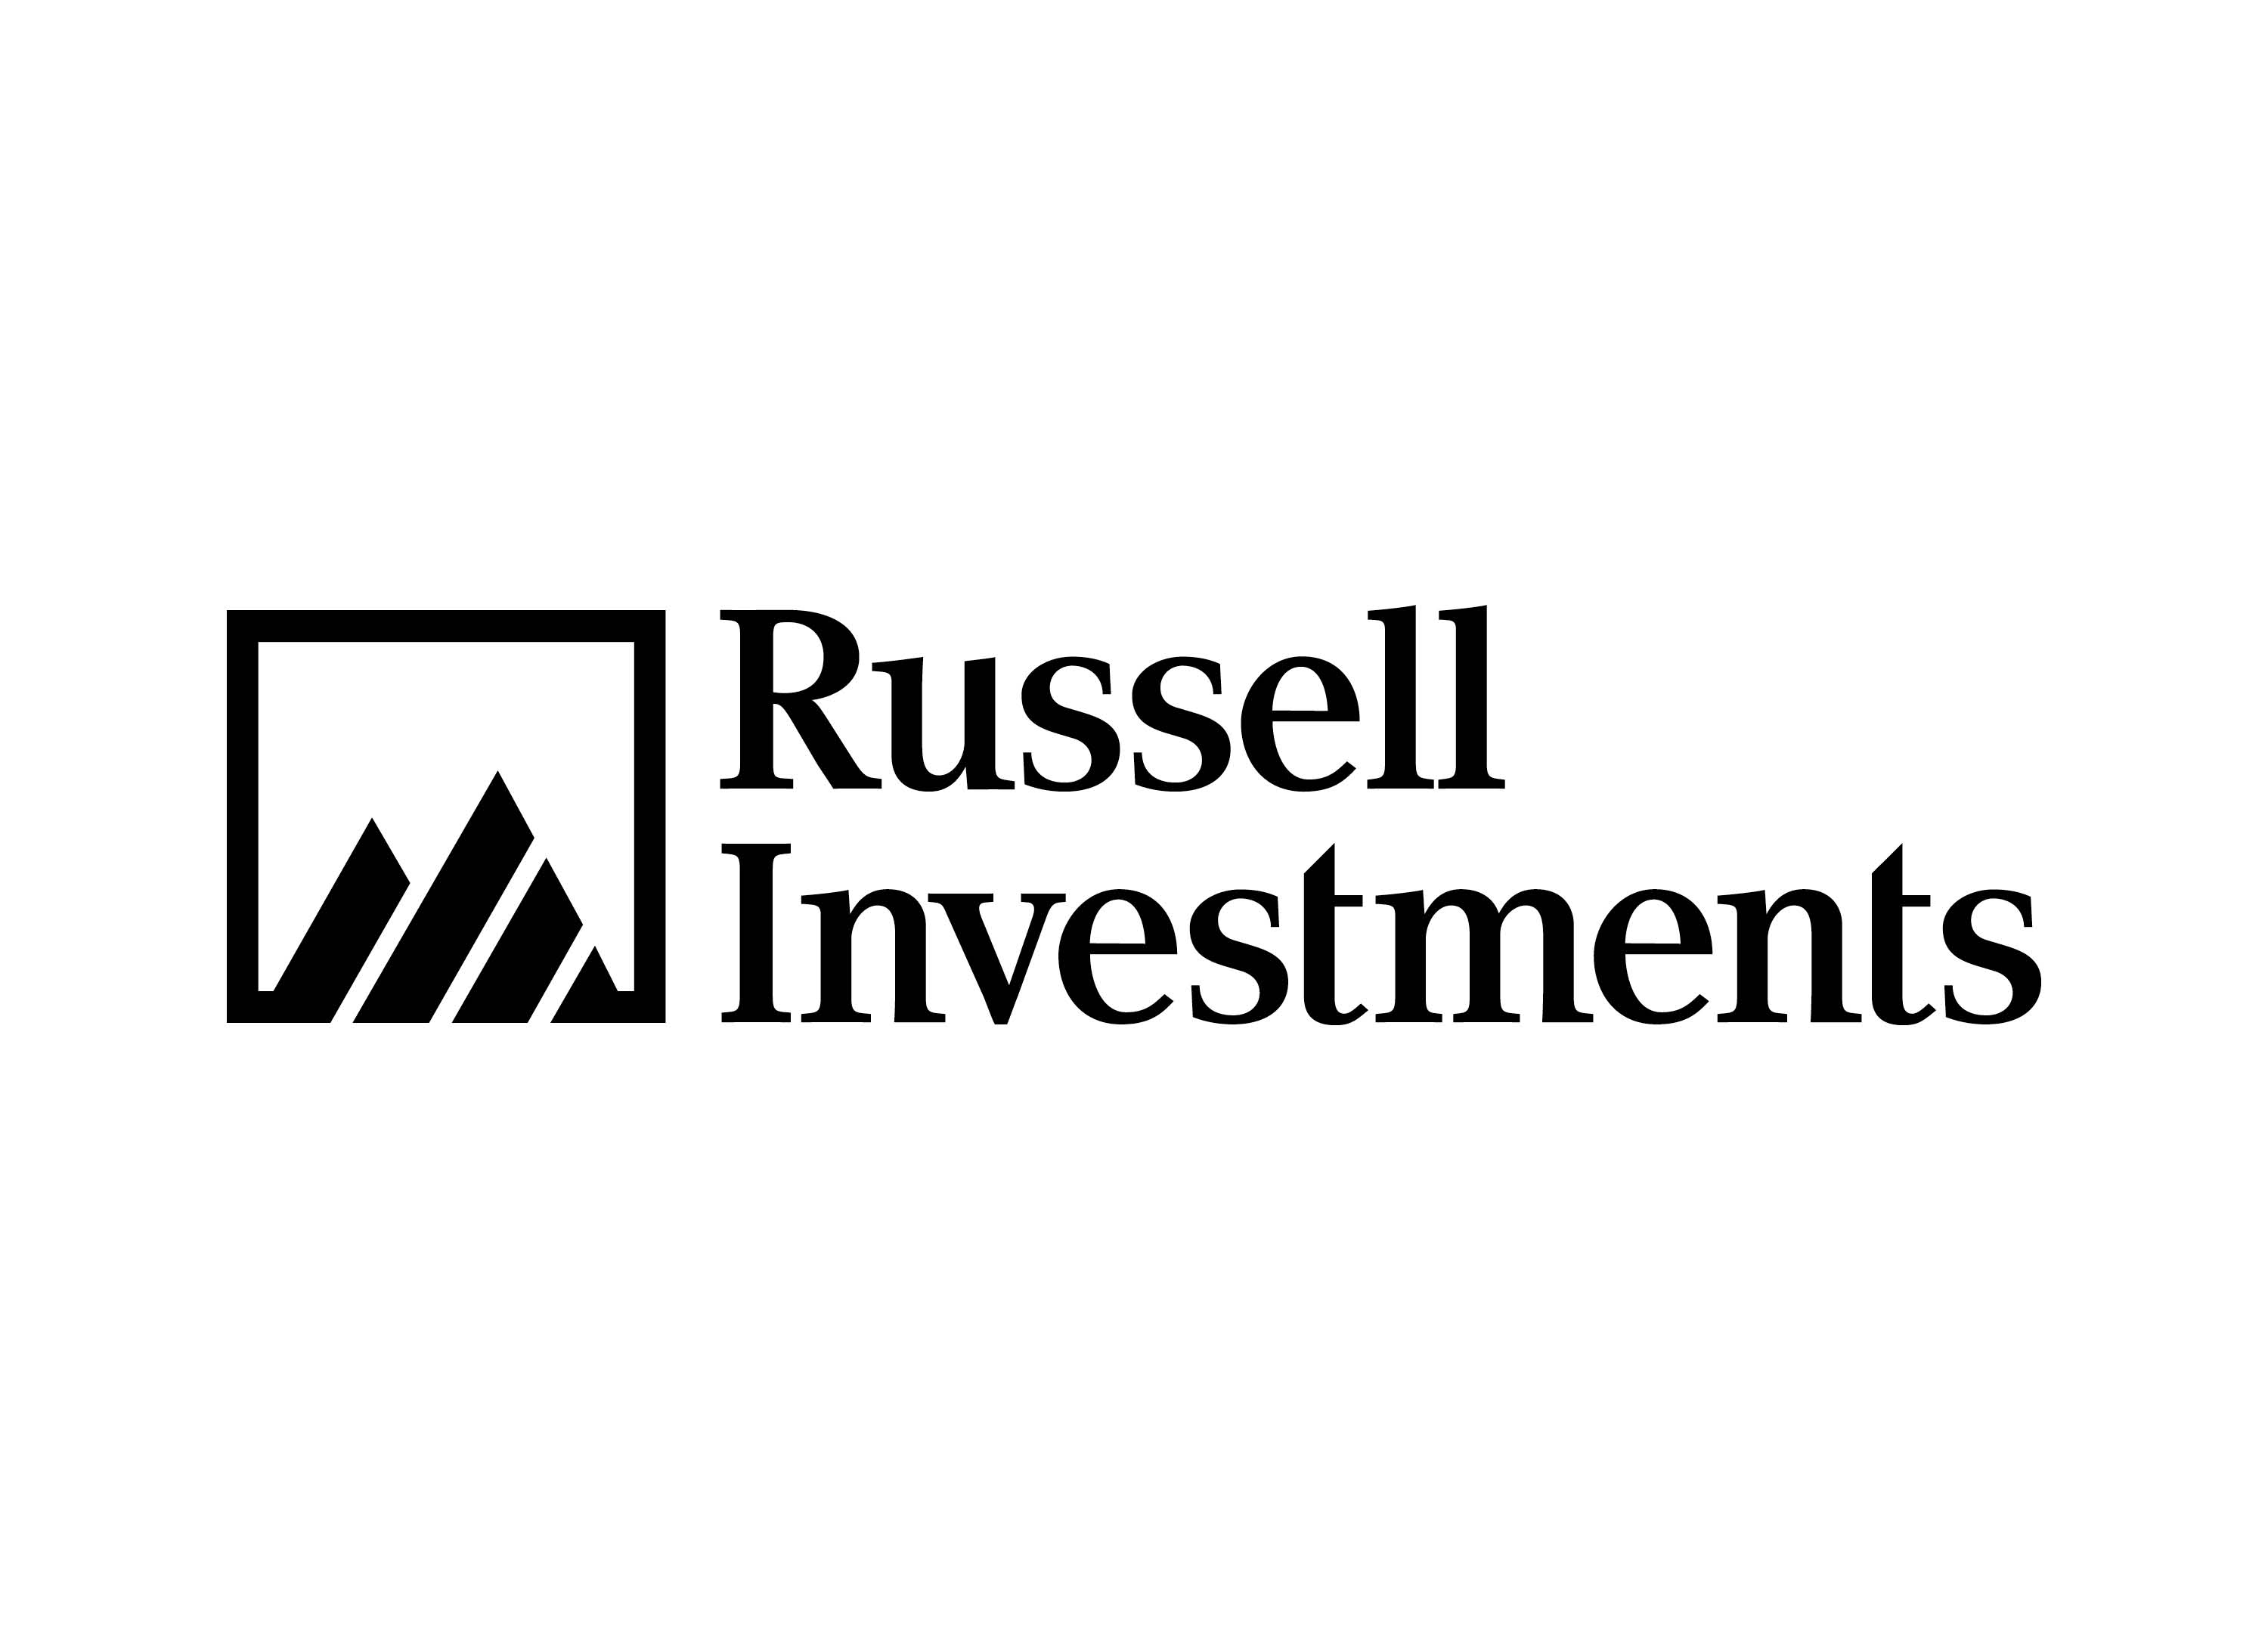 RussellInv